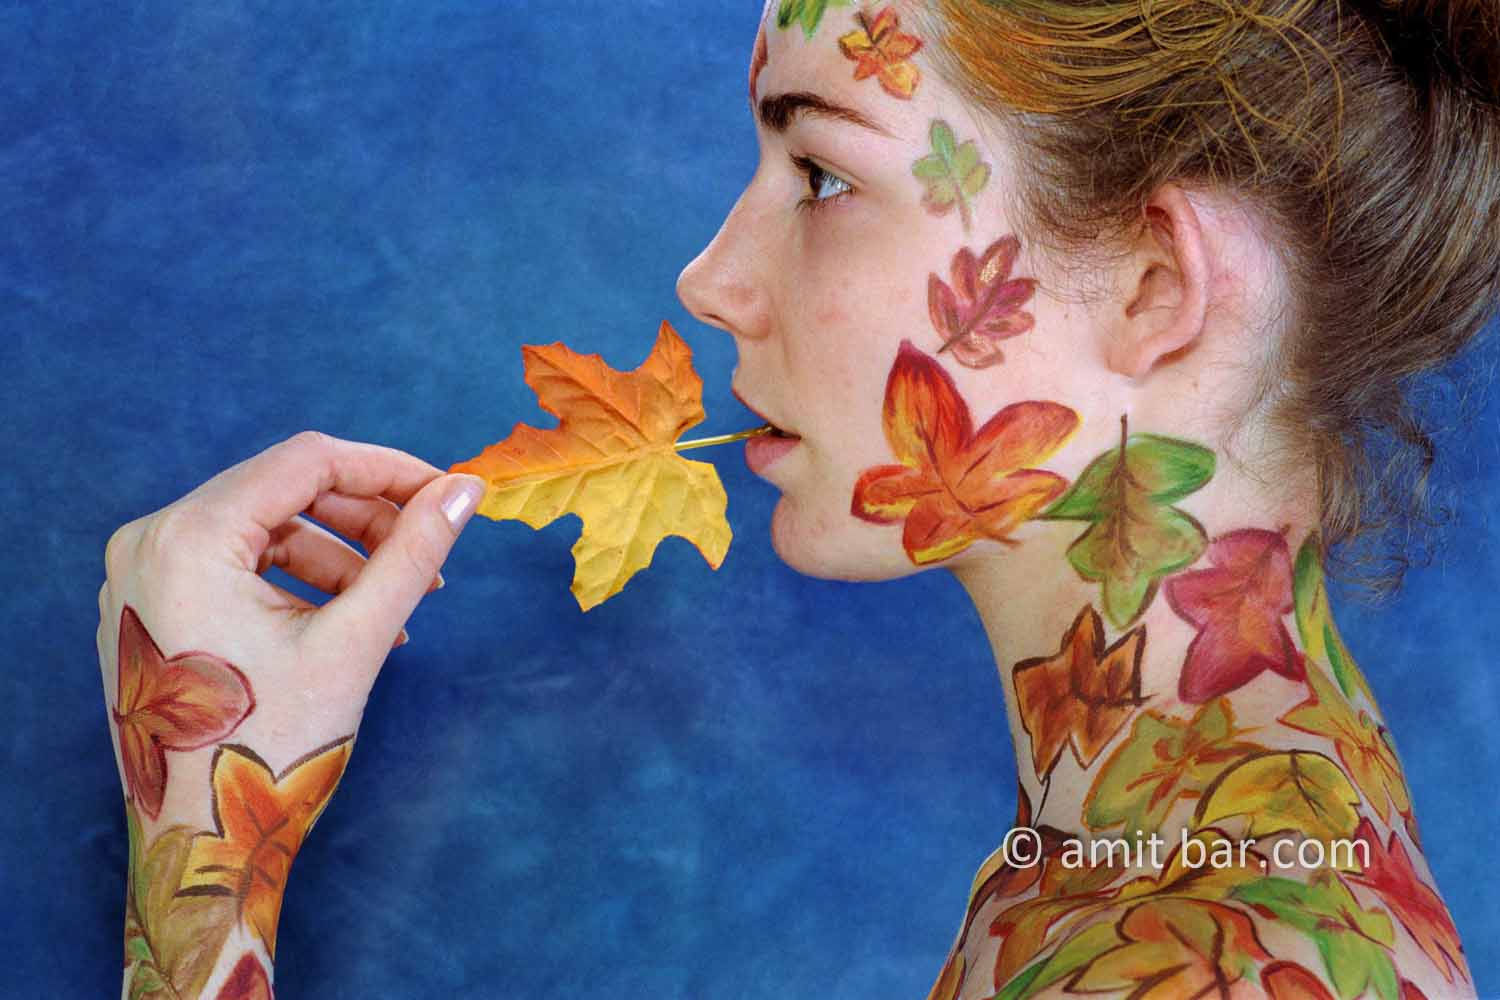 Autumn leaves body-painting IV: Portrait of a body-painted model with autumn leaves